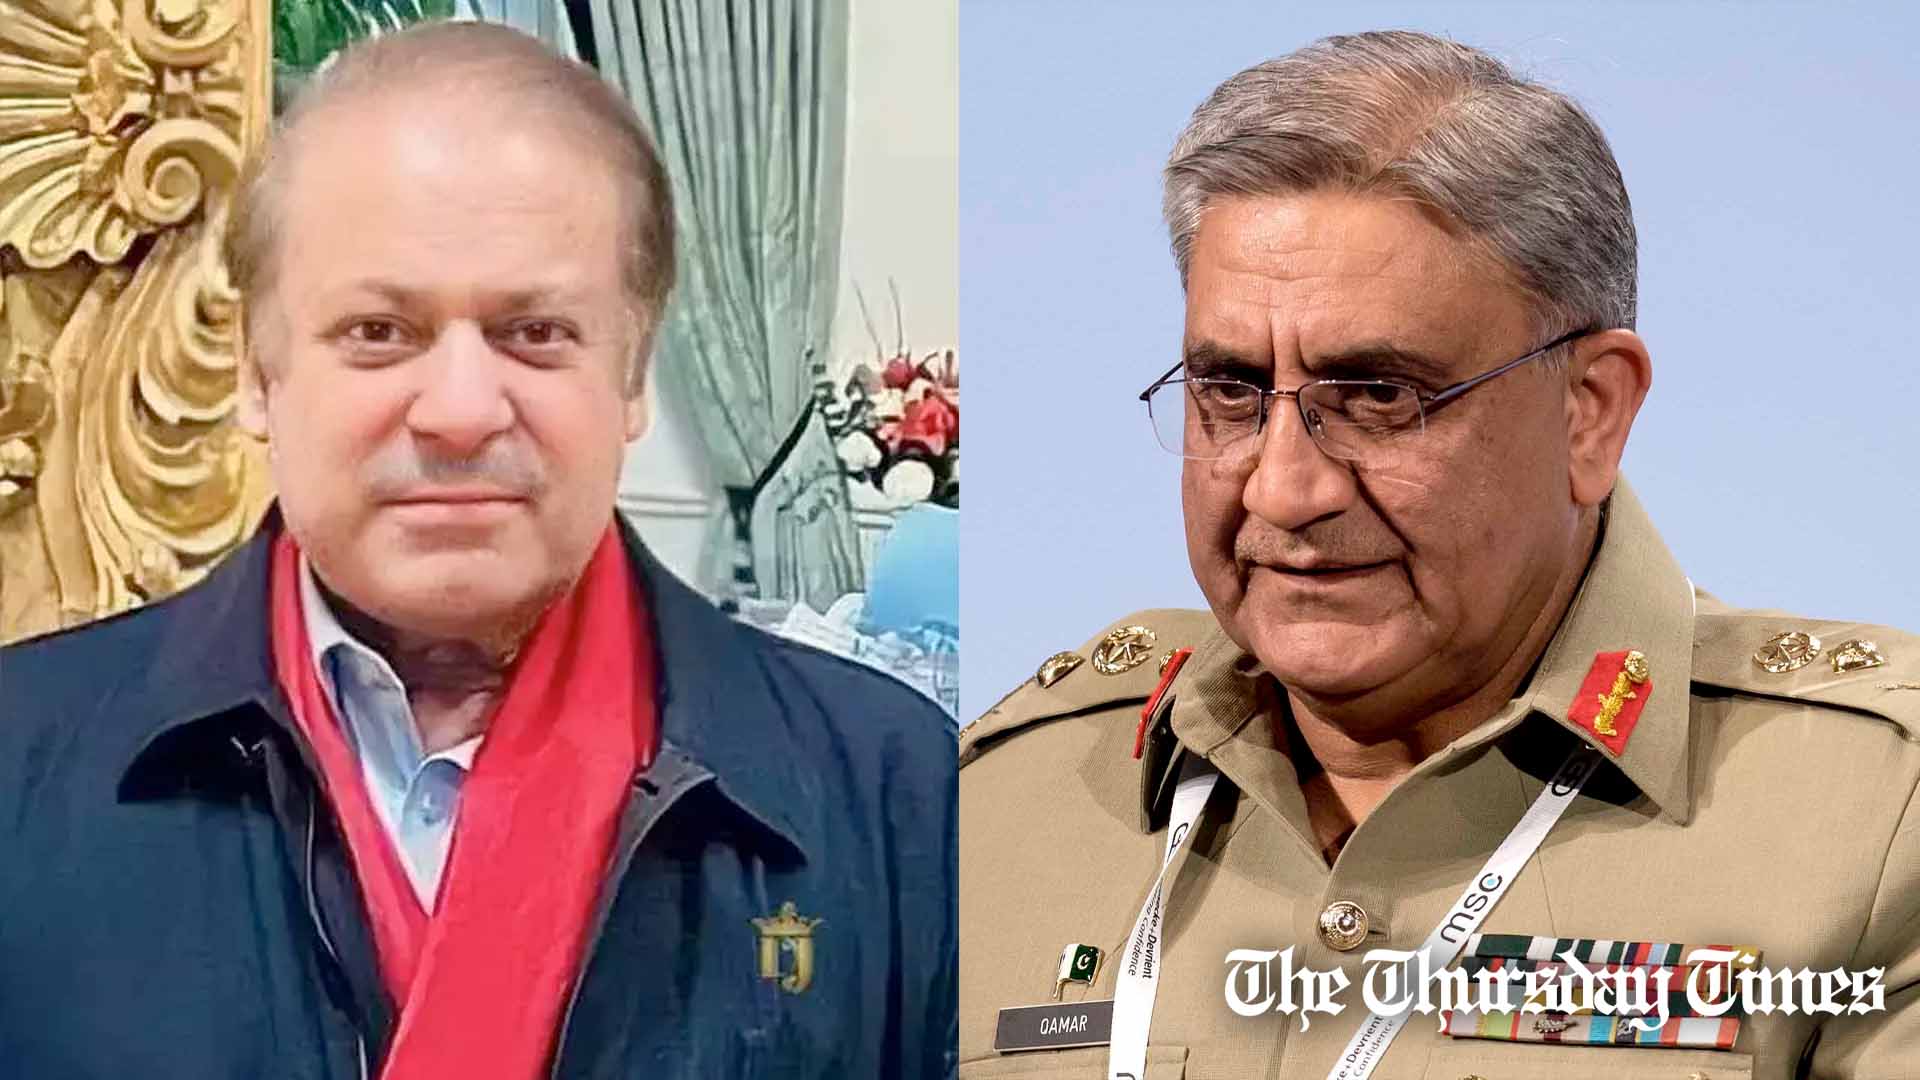 A combined file photo is shown of former prime minister Nawaz Sharif (L) and former COAS Qamar Javed Bajwa. — FILE/THE THURSDAY TIMES